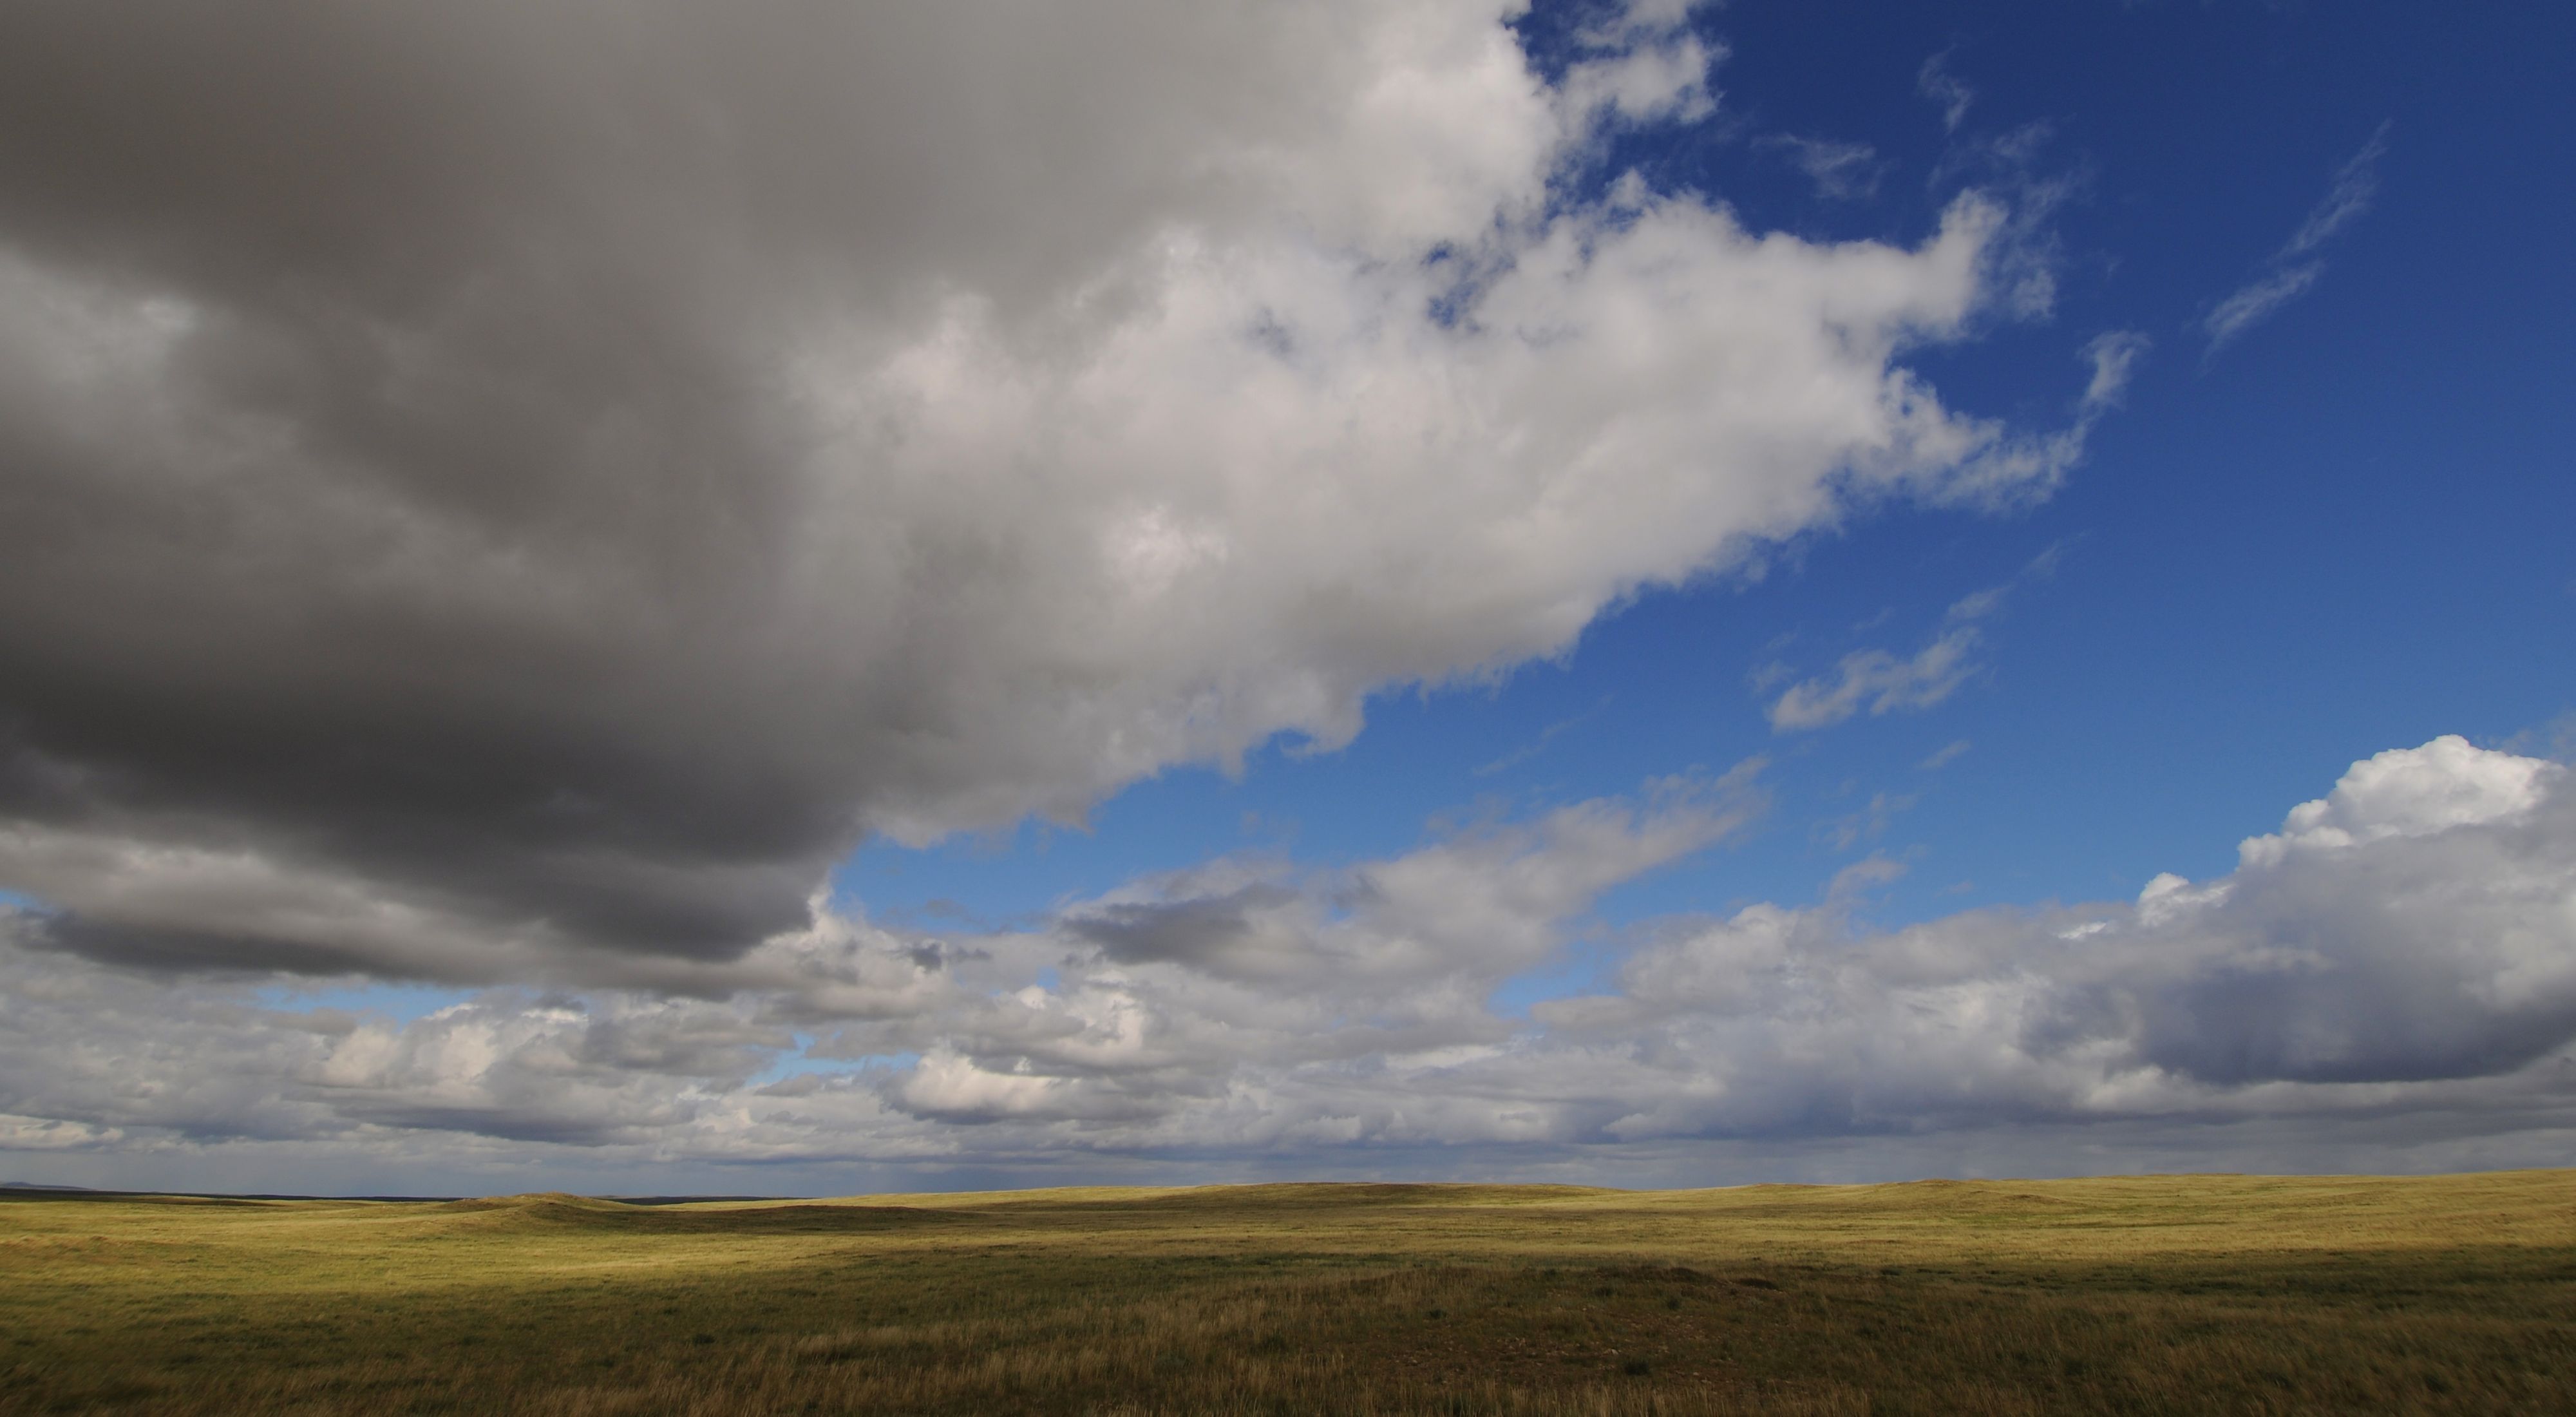 Storm clouds over a vast and empty grassland.